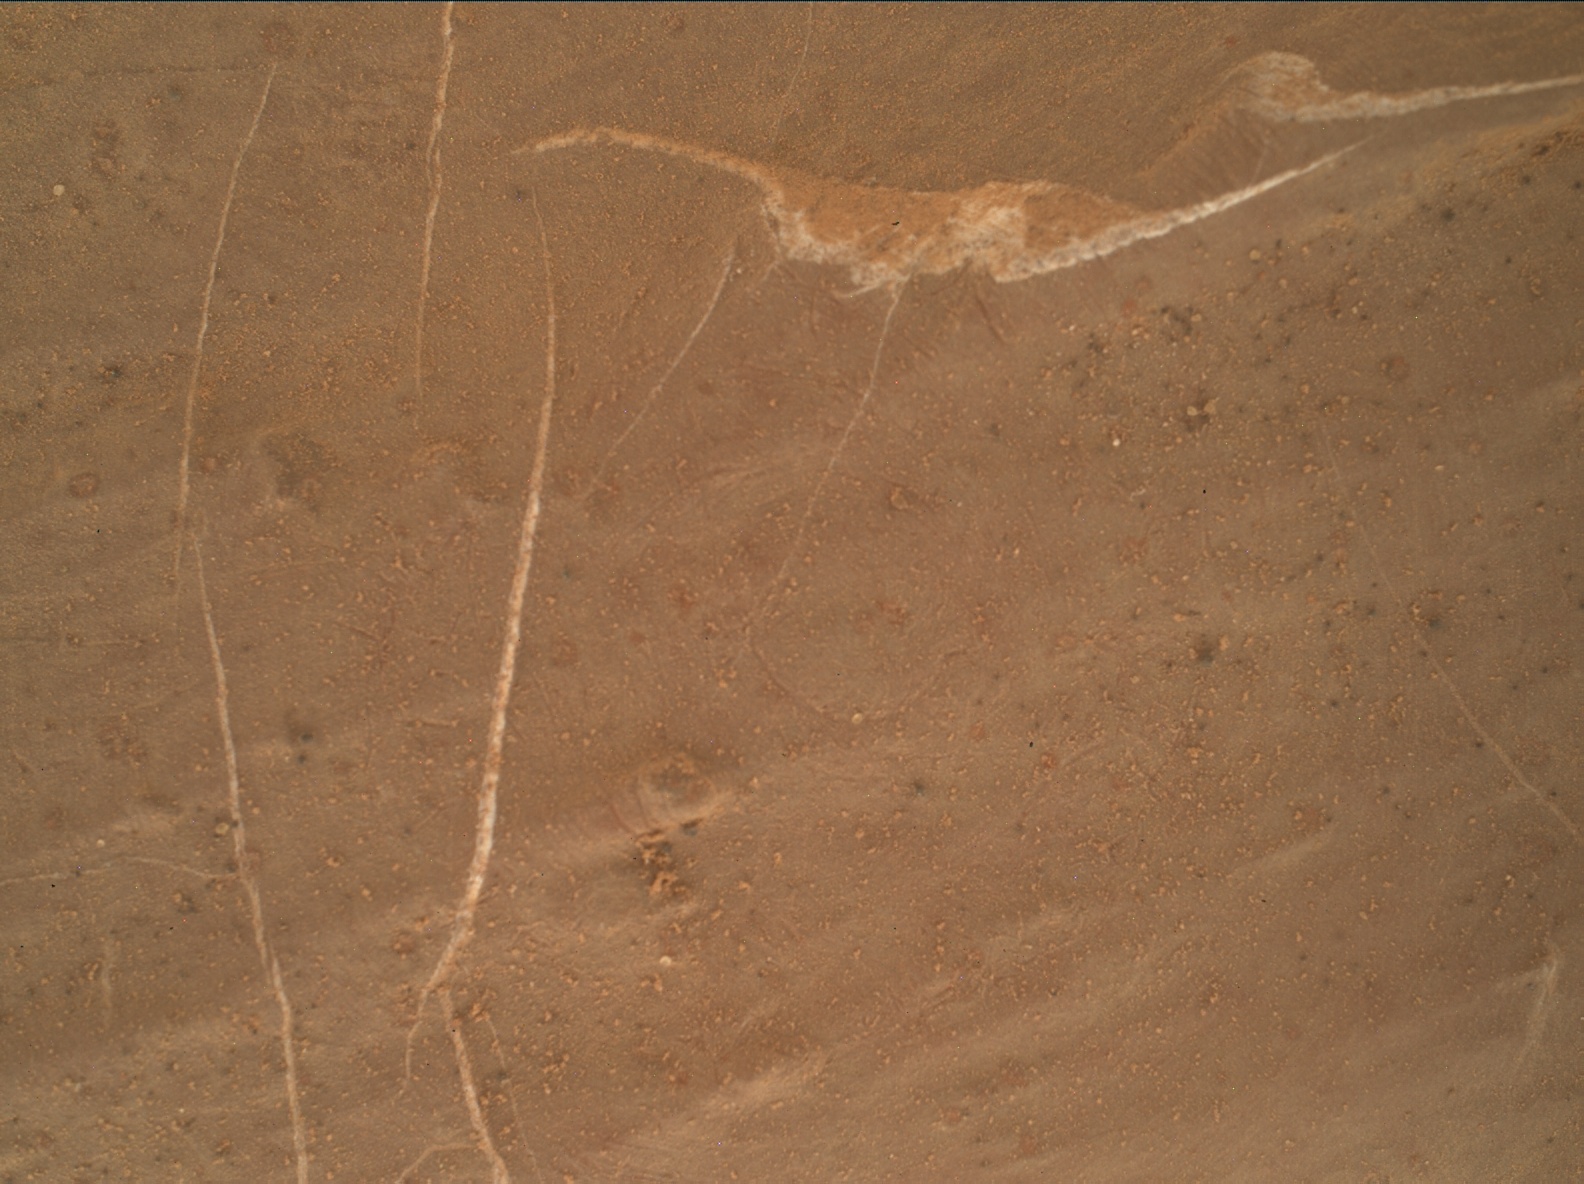 Nasa's Mars rover Curiosity acquired this image using its Mars Hand Lens Imager (MAHLI) on Sol 2745